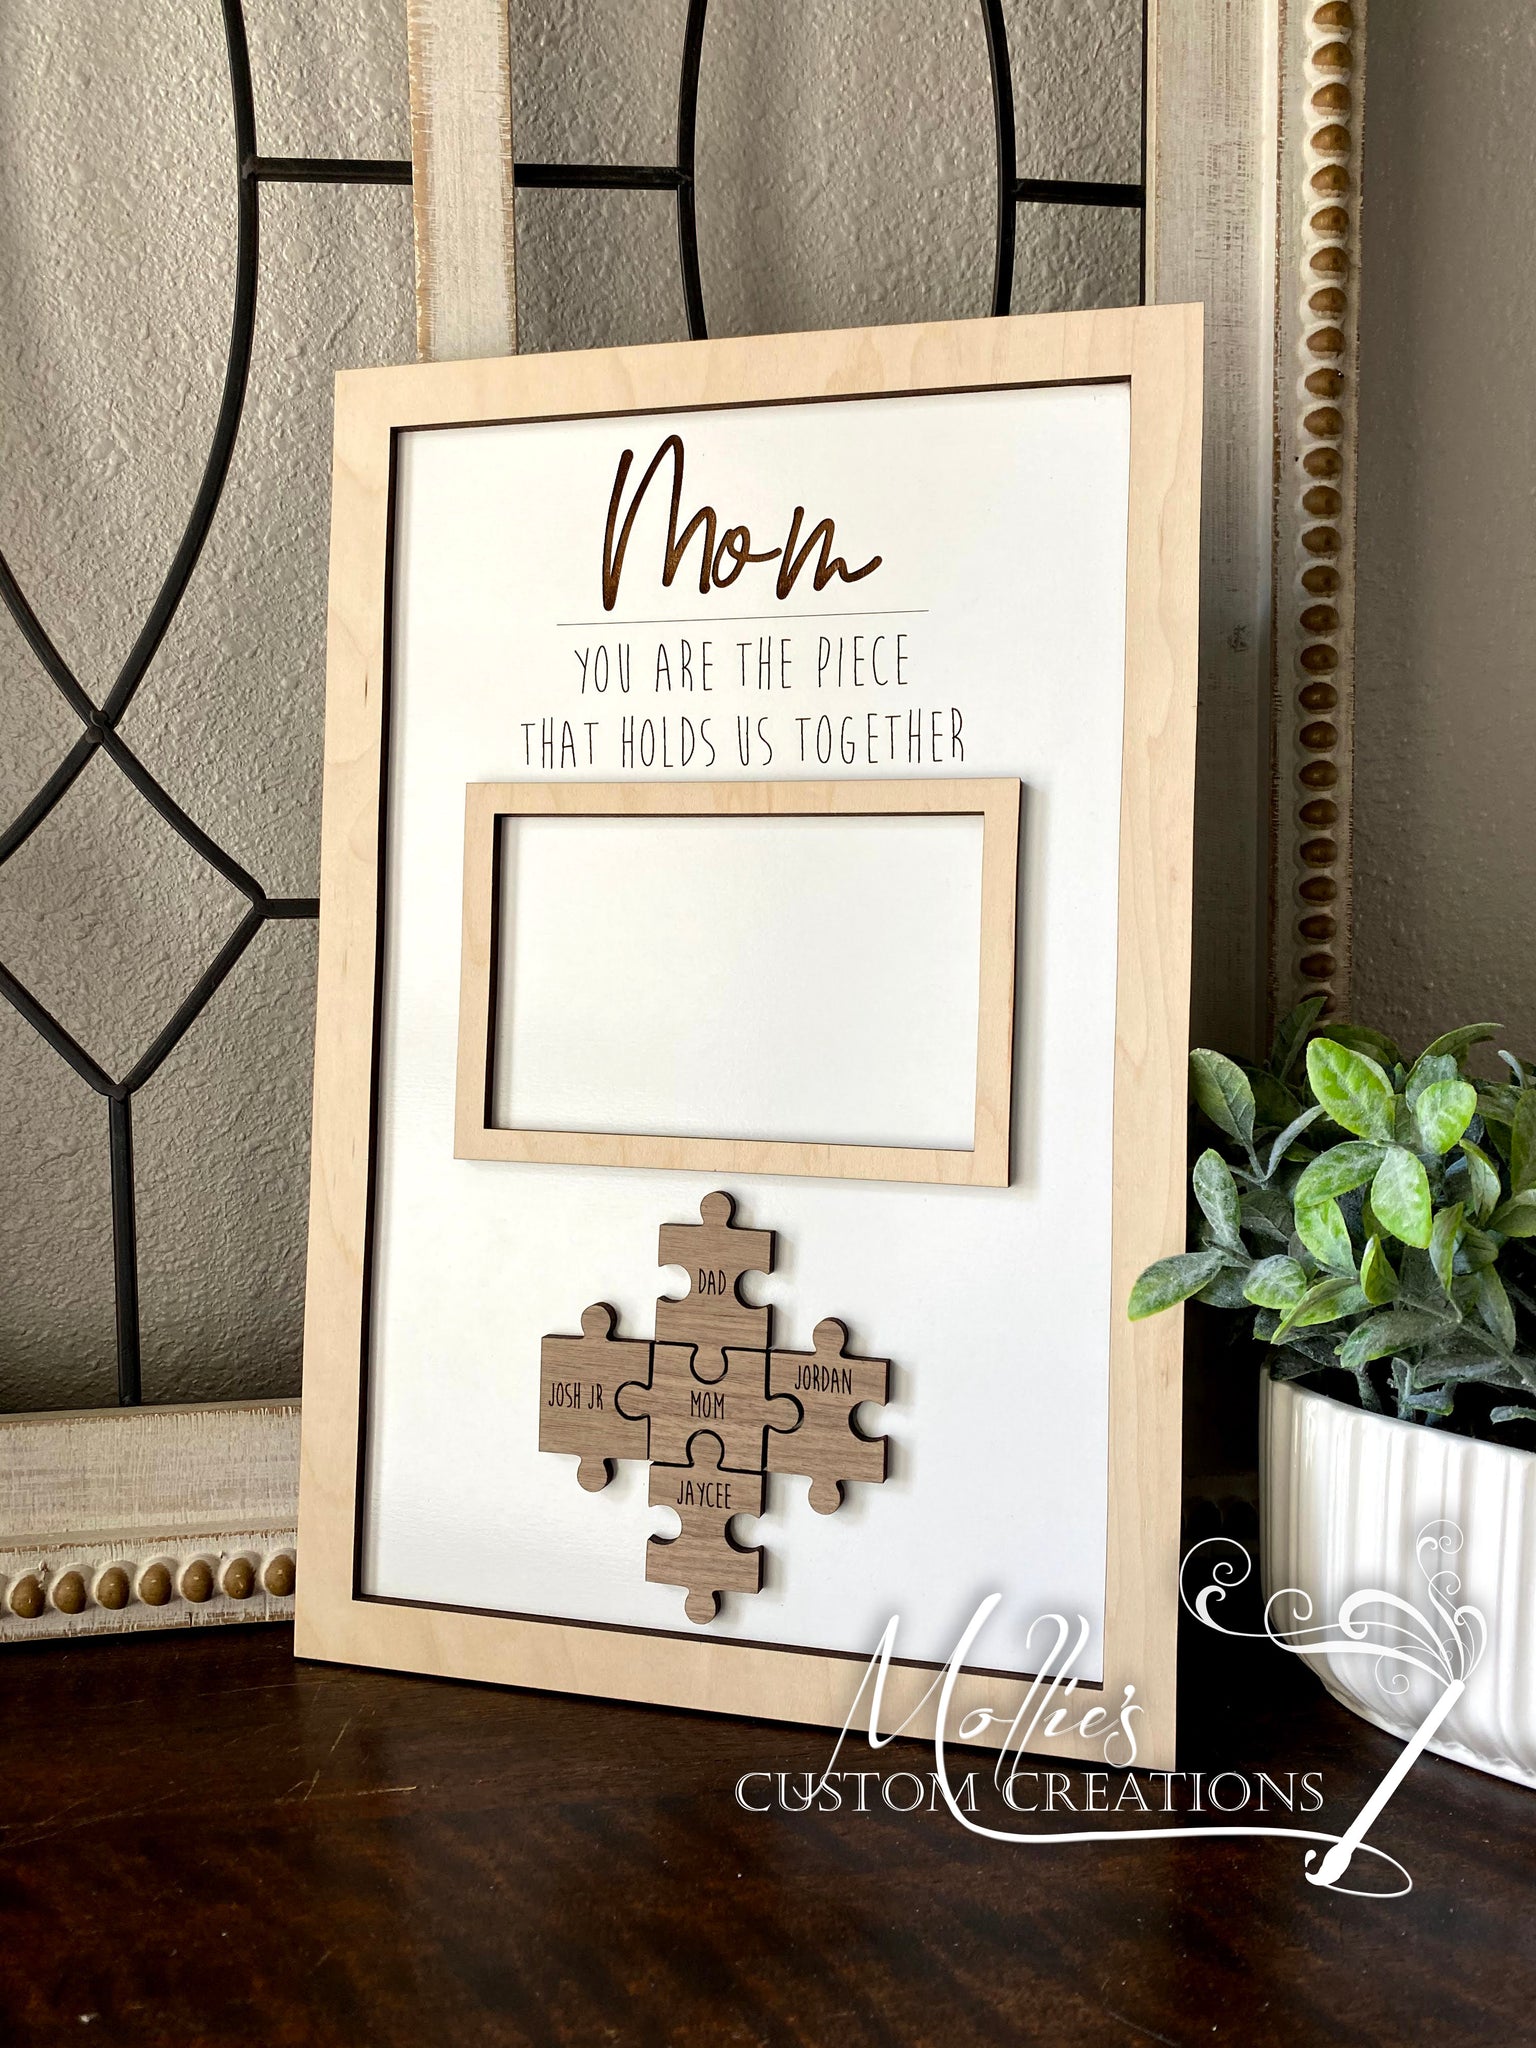 Personalized Gifts For Grandma, Grandma Puzzle Sign With Kids